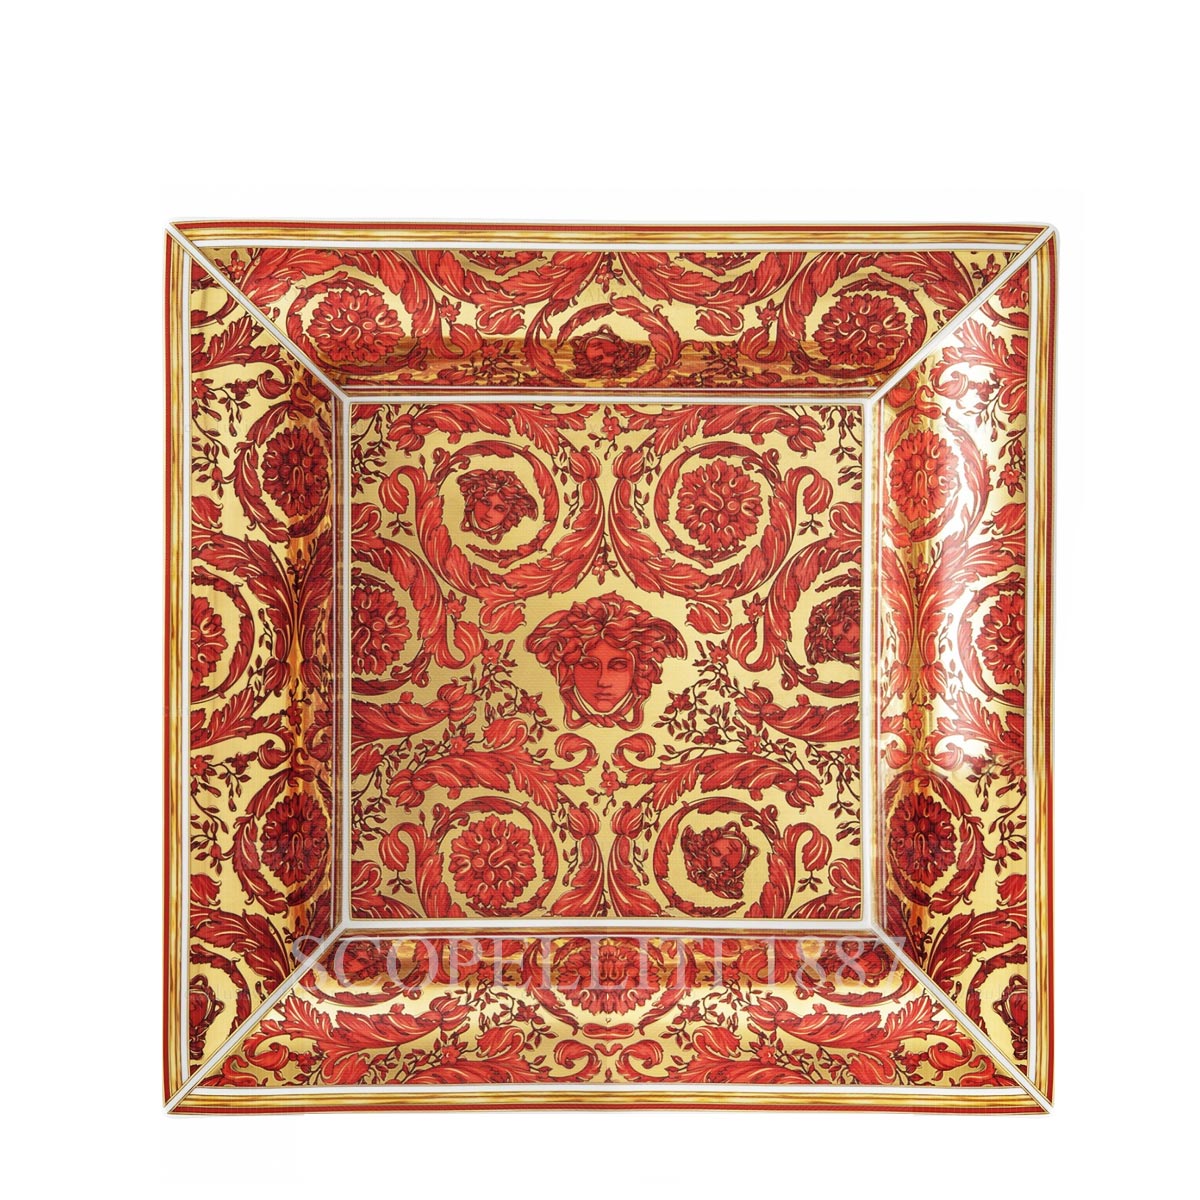 Versace Square Plate 28 cm Medusa Garland Red | Versace Gift